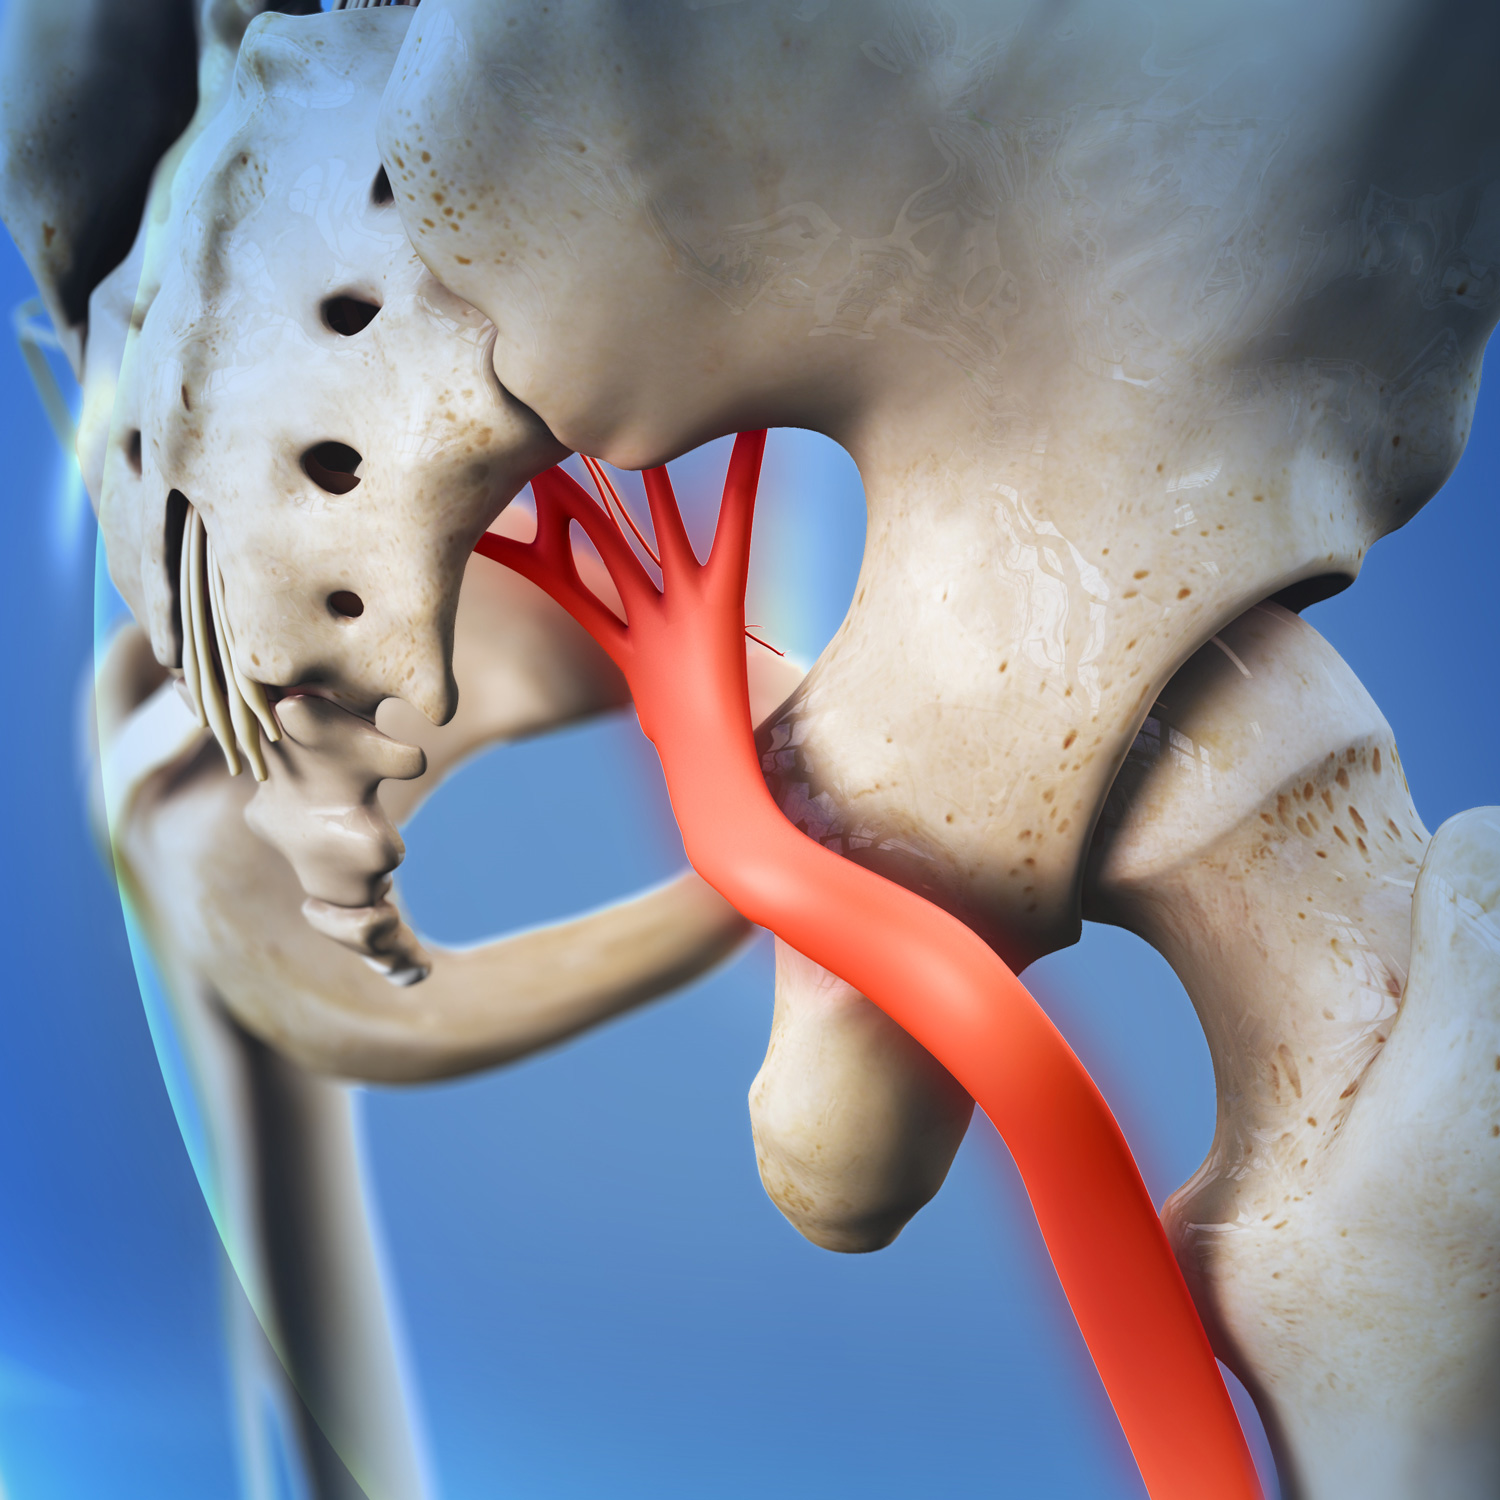 sciatica pain that occurs when the nerve is compressed or irritated